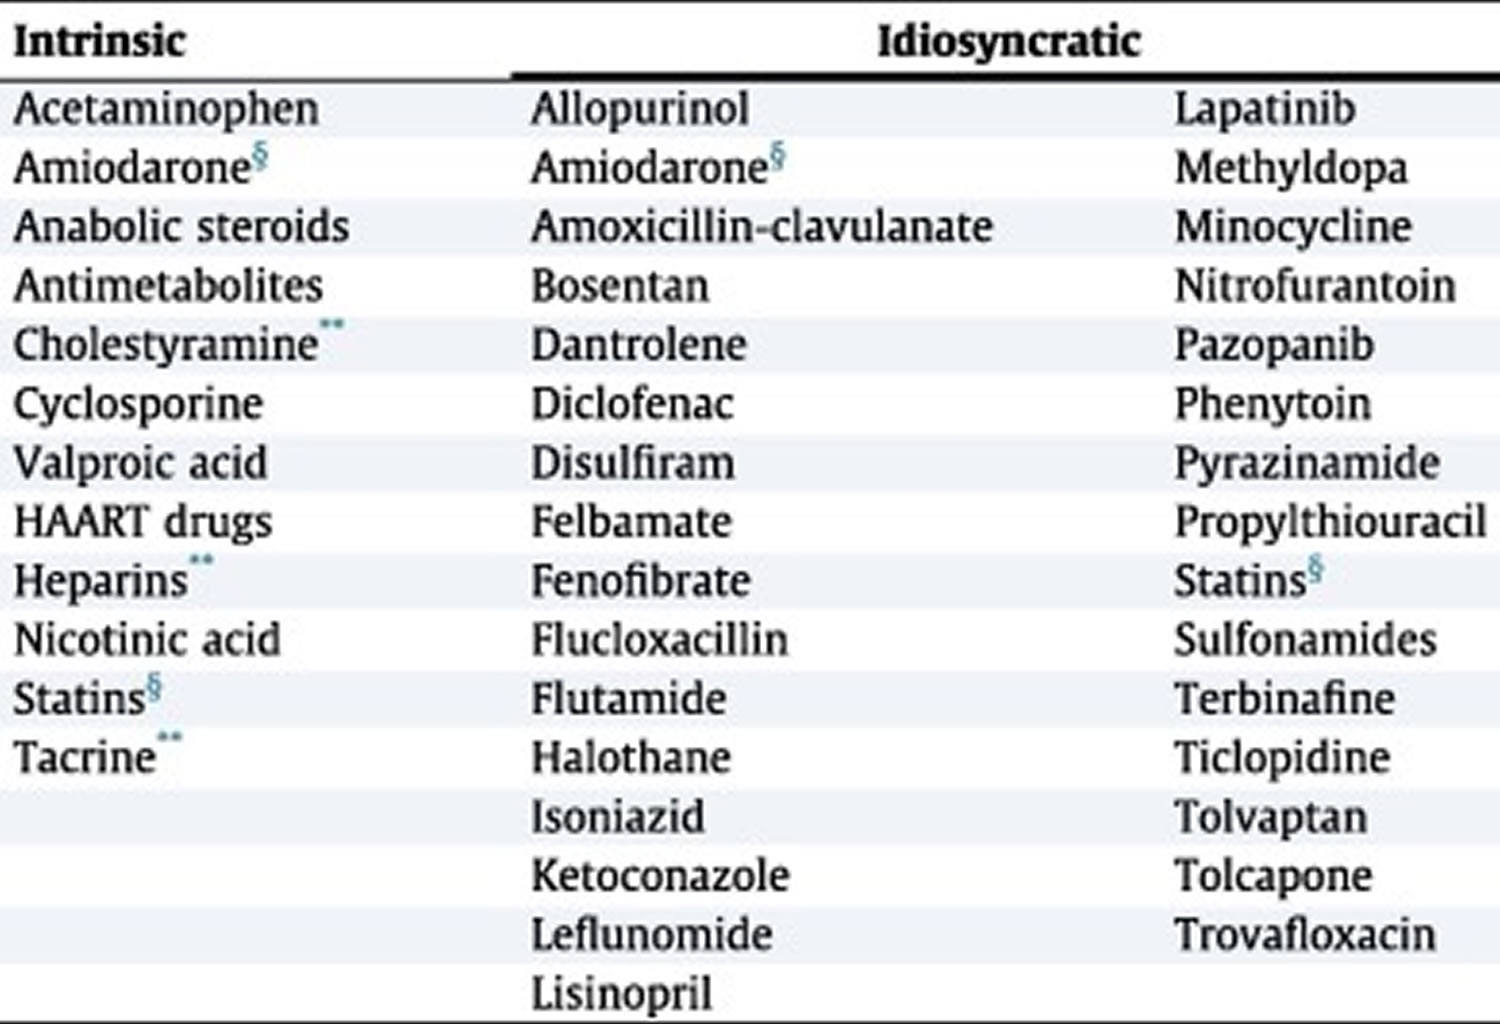 Drugs associated with DILI